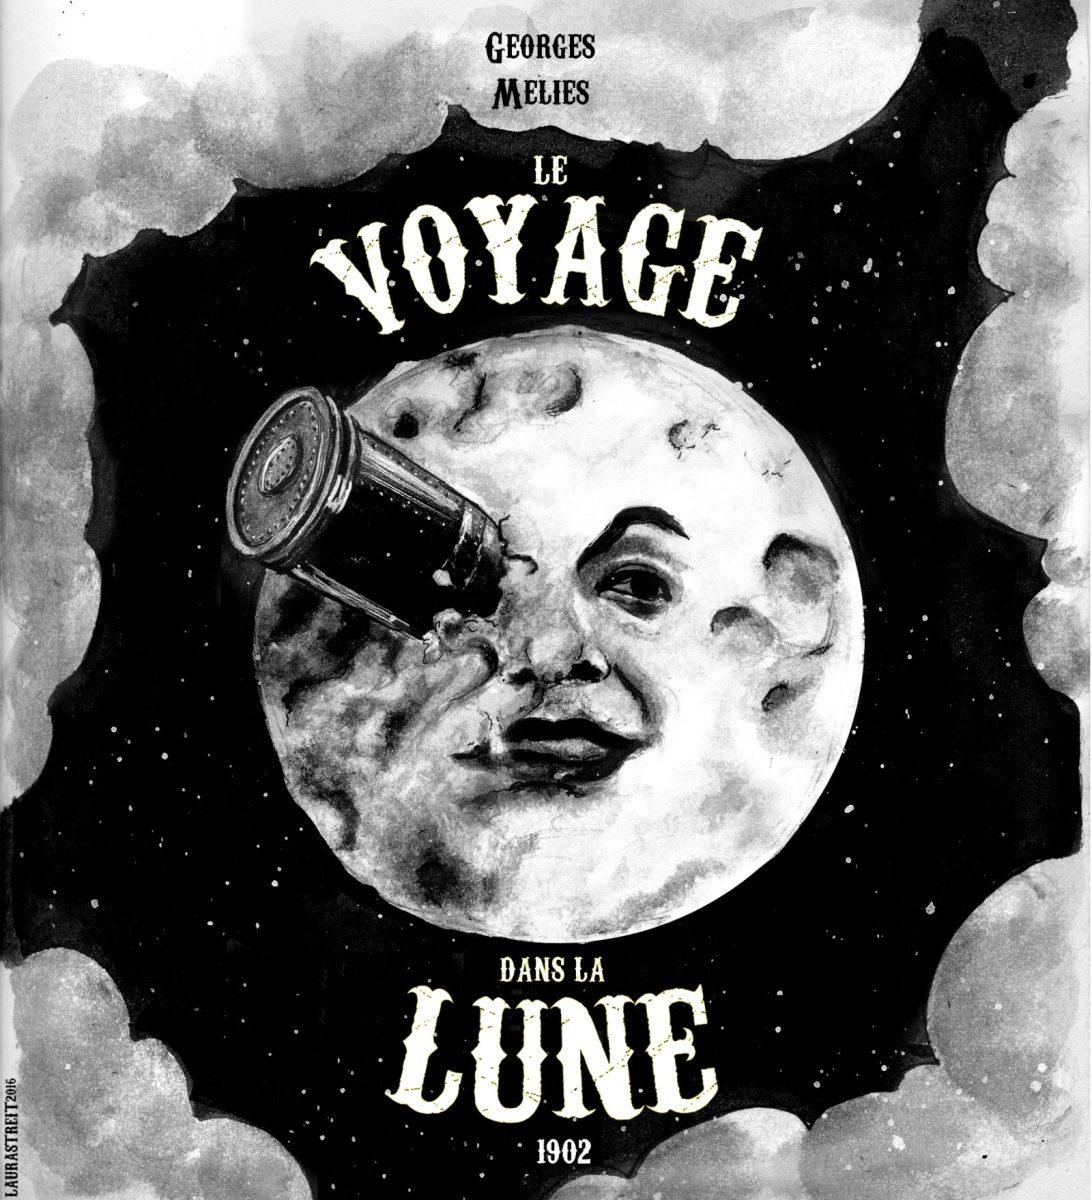 Le+Voyage+Dans+La+Lune+or+A+Trip+to+the+Moon+is+a+16+minute+movie+that+was+released+in+1902.